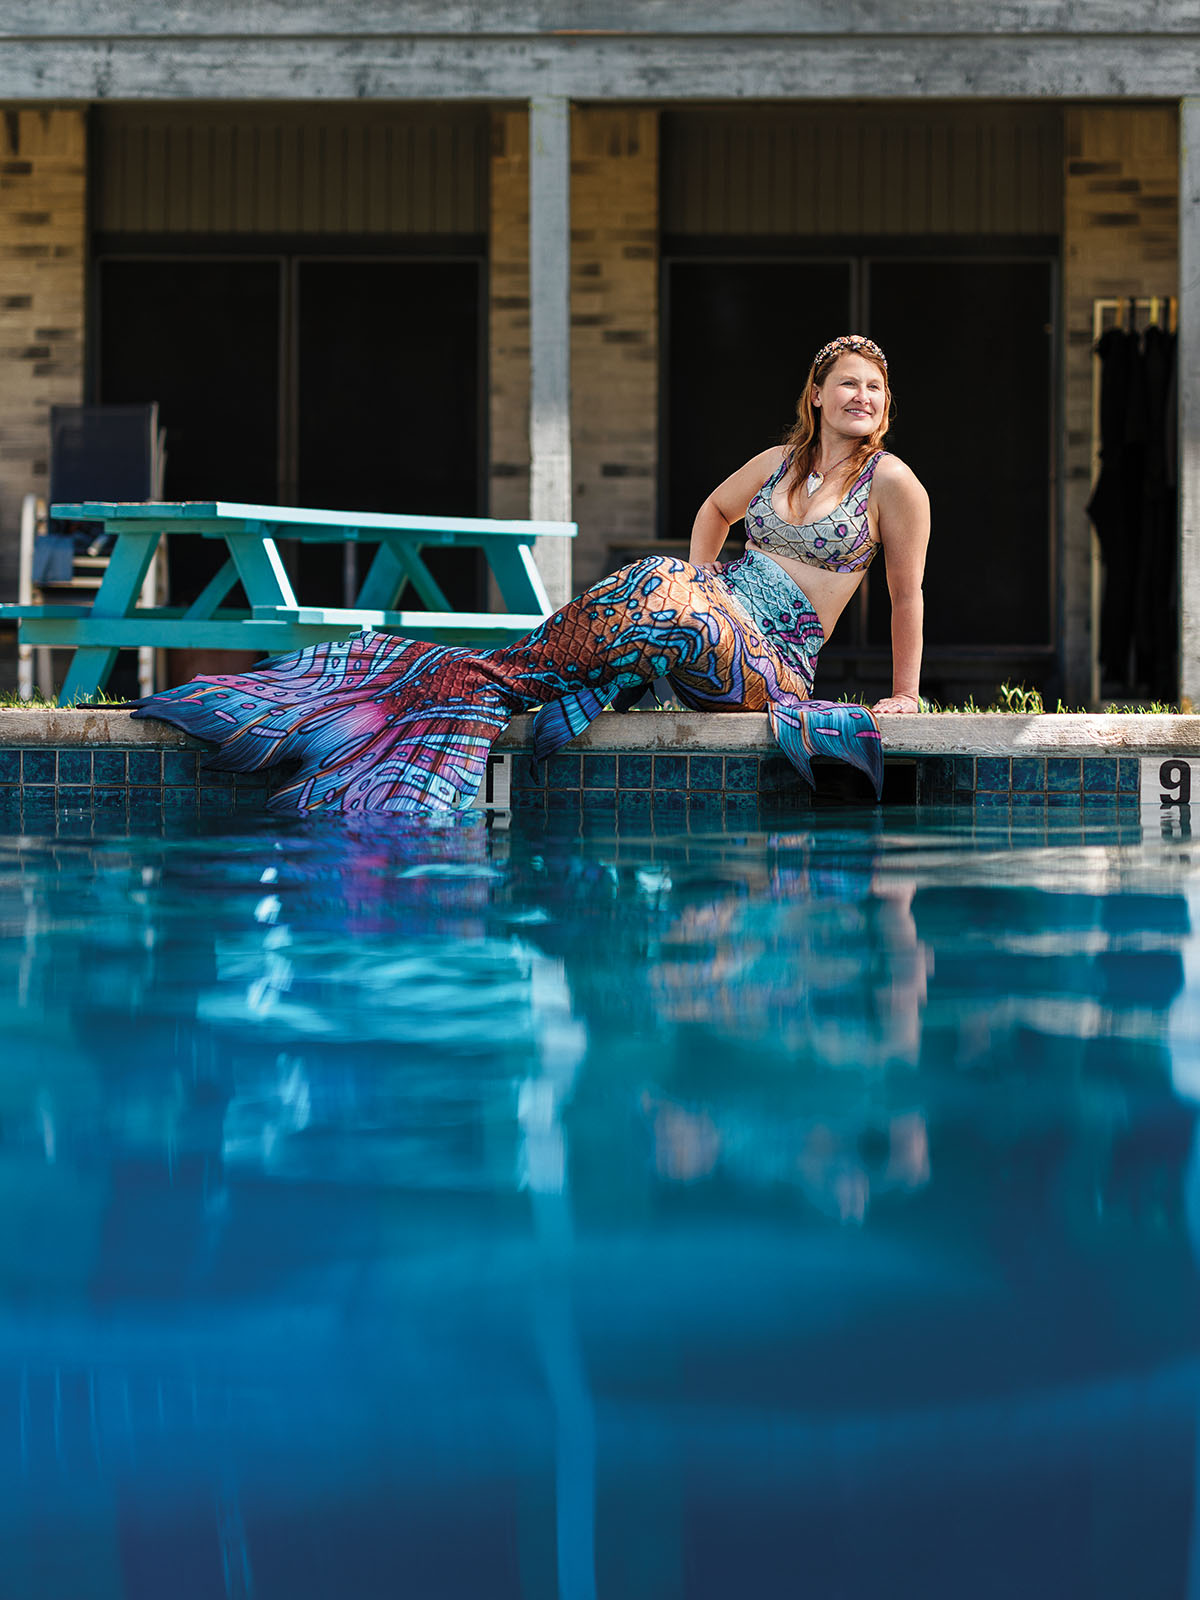 A woman wearing a mermaid costume with a large, colorful tail sits by the side of a bright blue pool